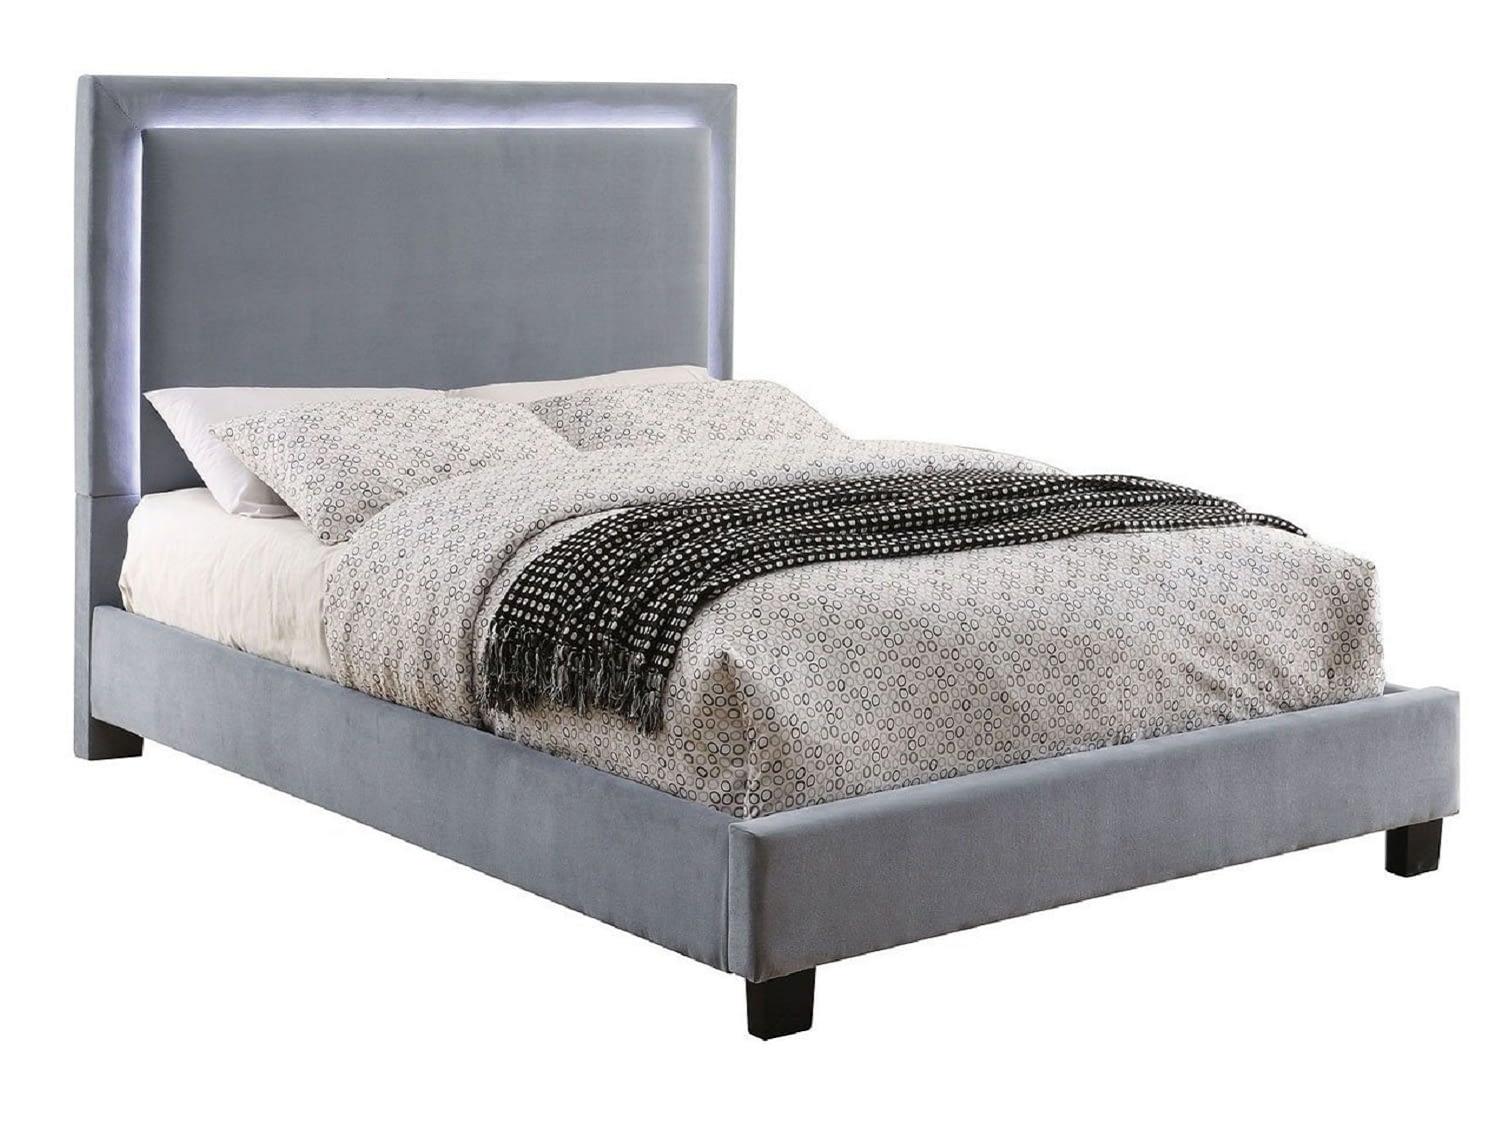 ATHENS King Bed - Zoom